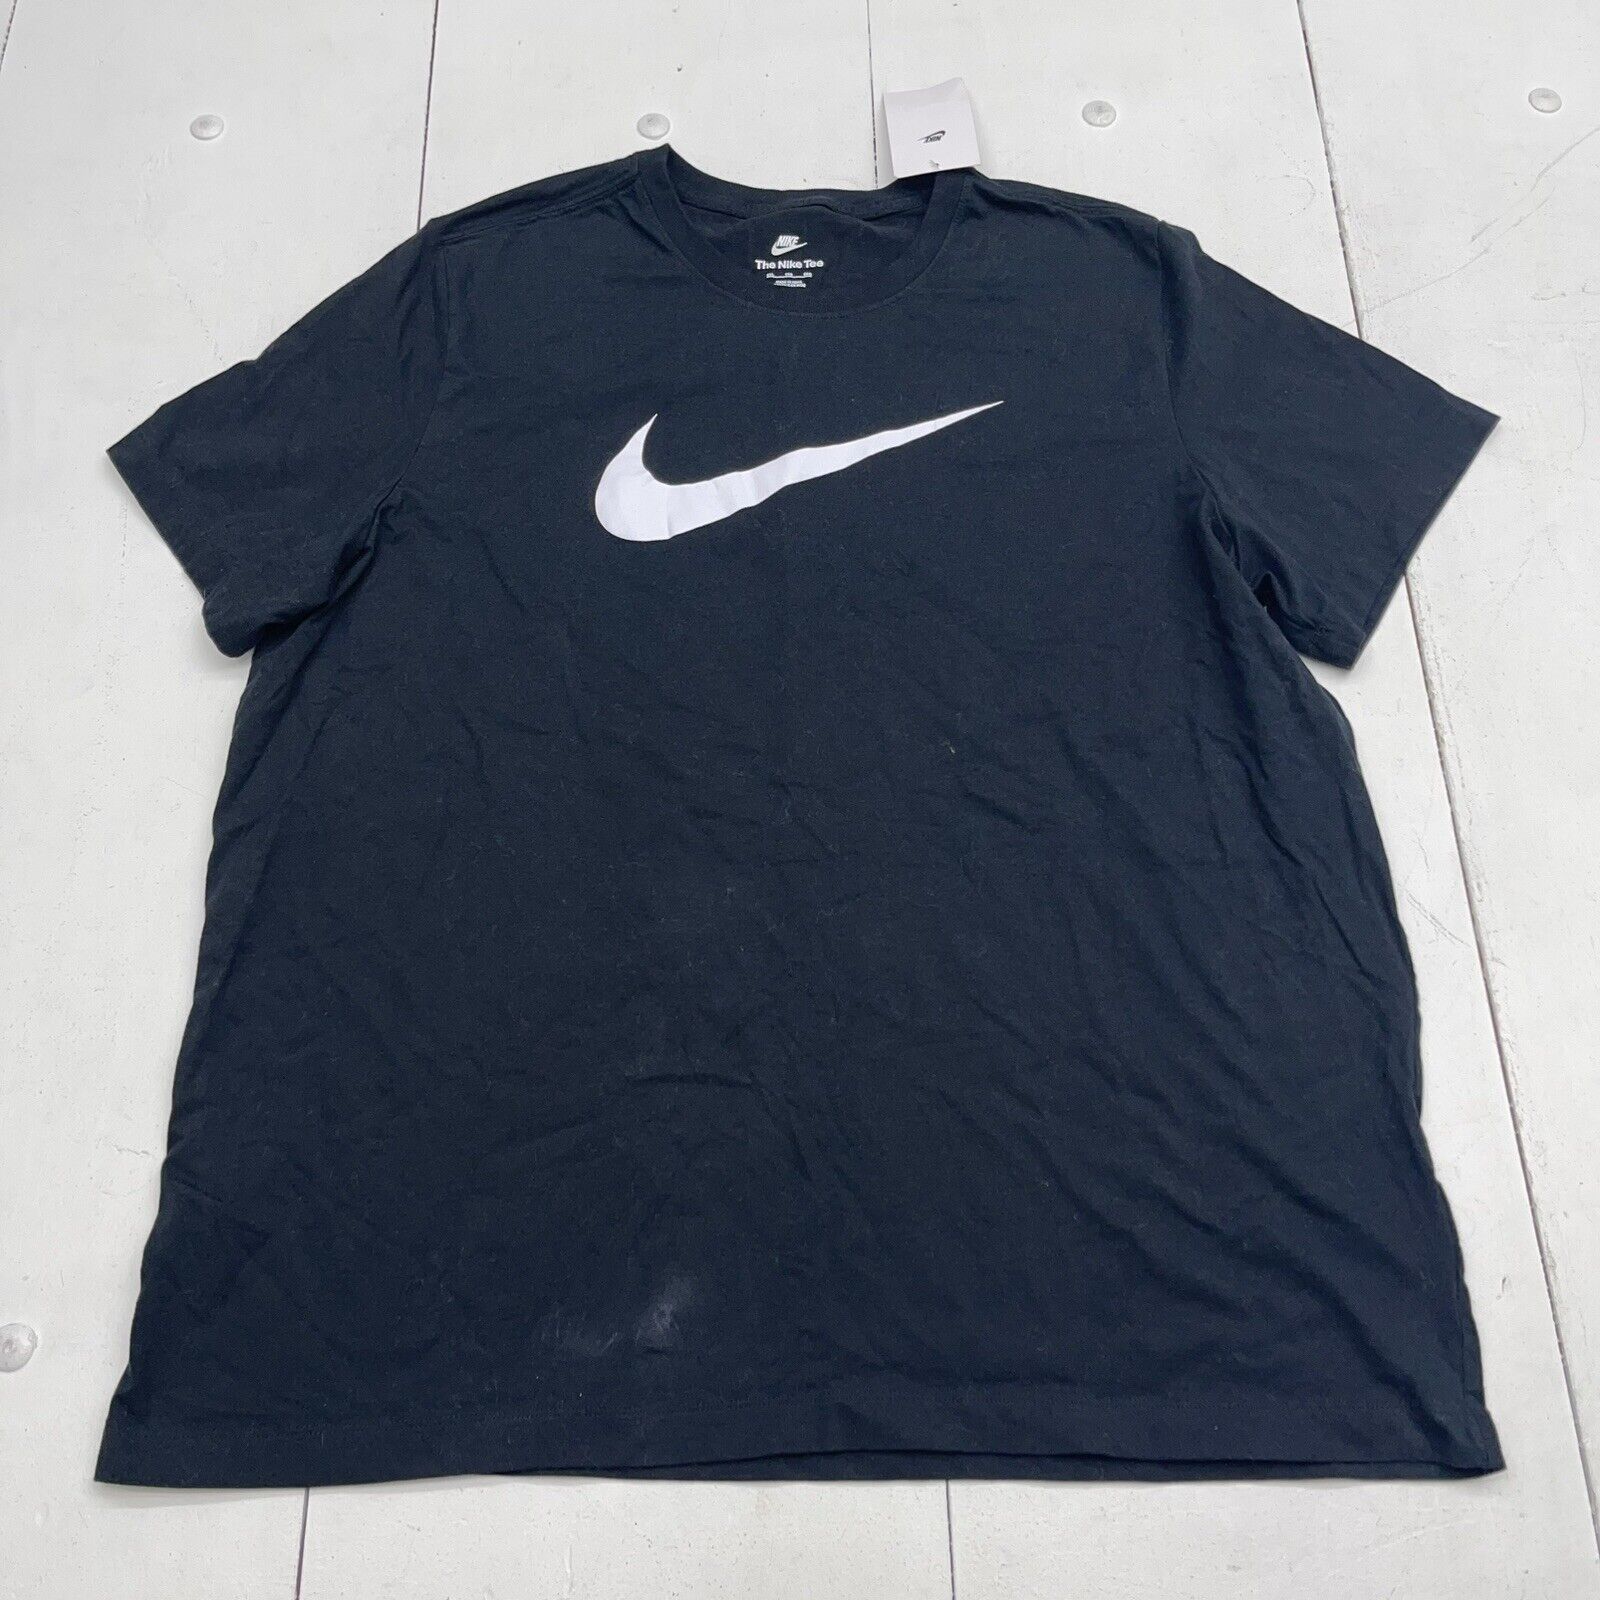 Nike Black Graphic Sleeve T Shirt Mens Size XXL New Defect beyond exchange